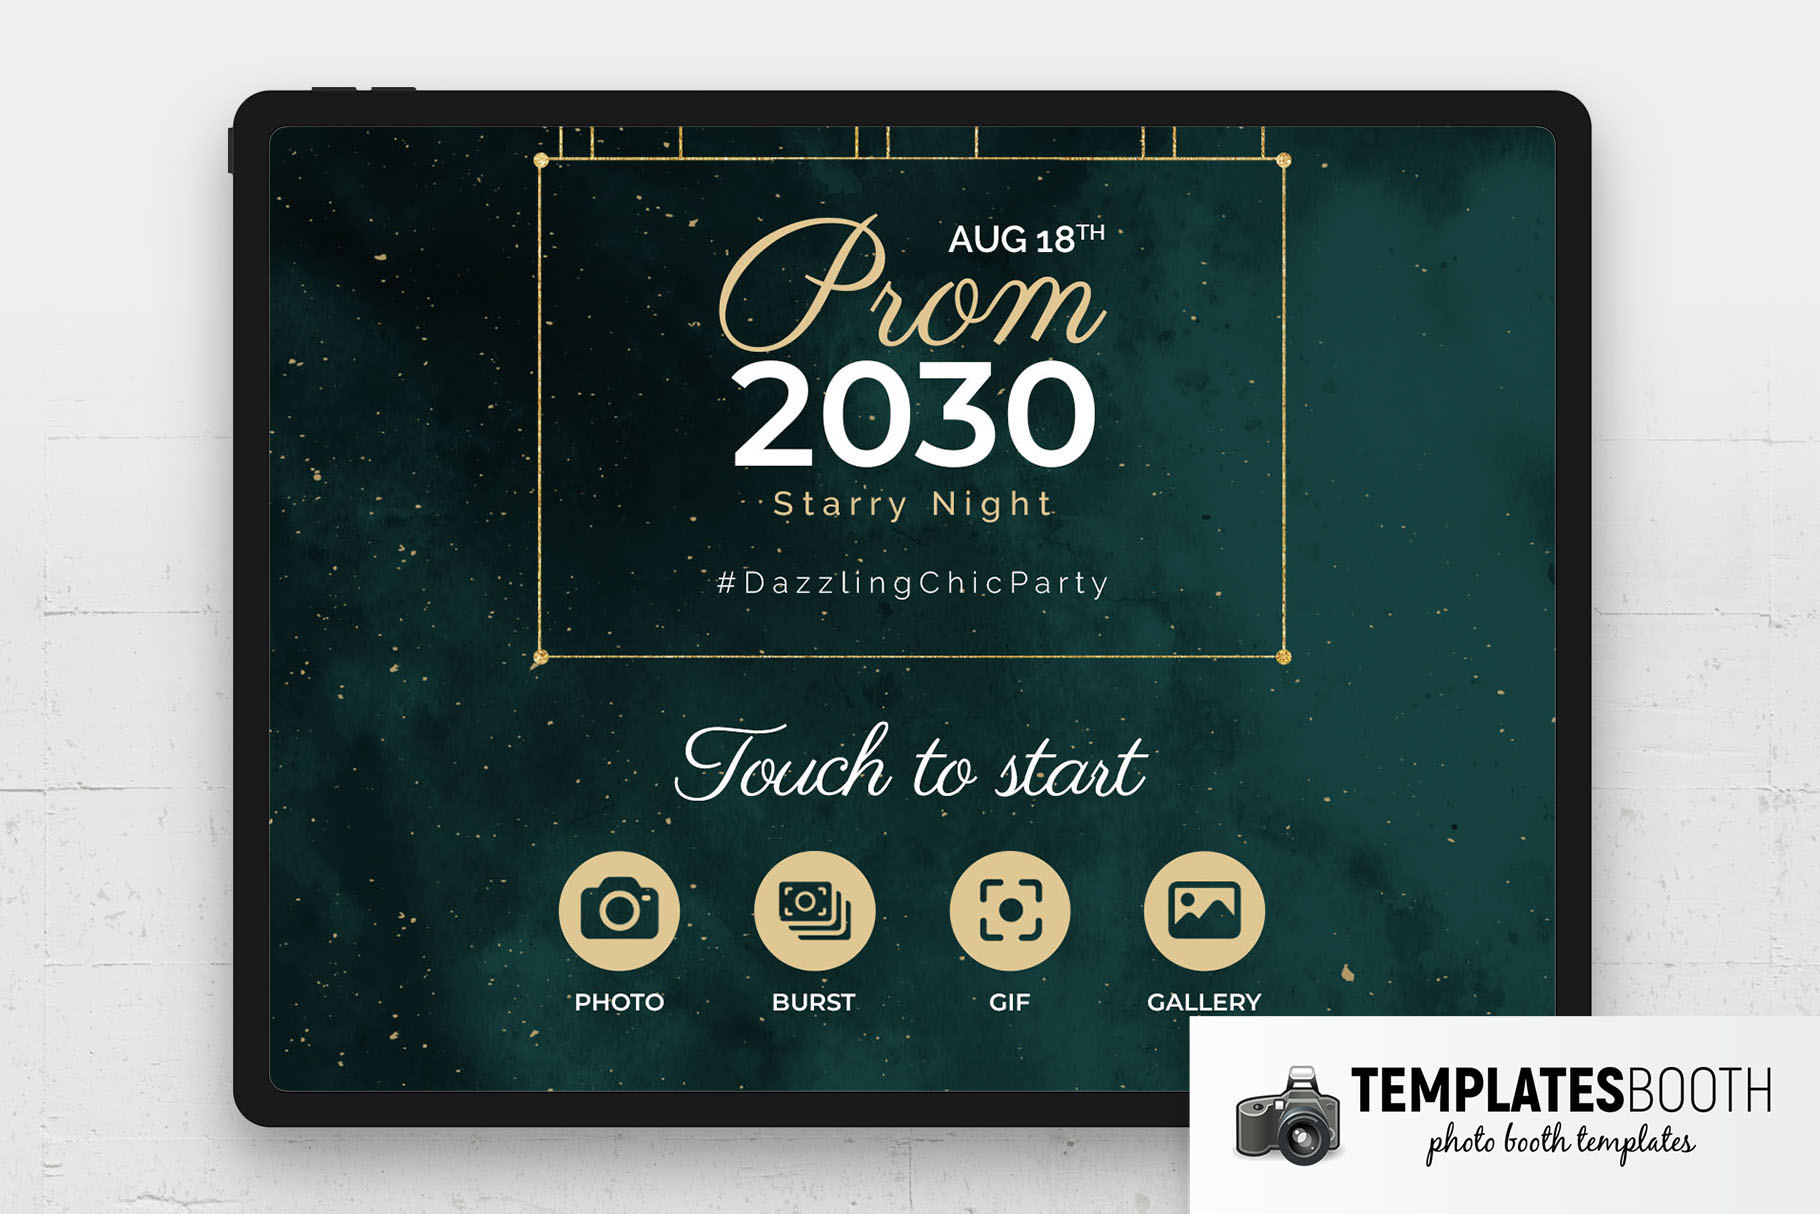 Free Prom Photo Booth Template Welcome Screen